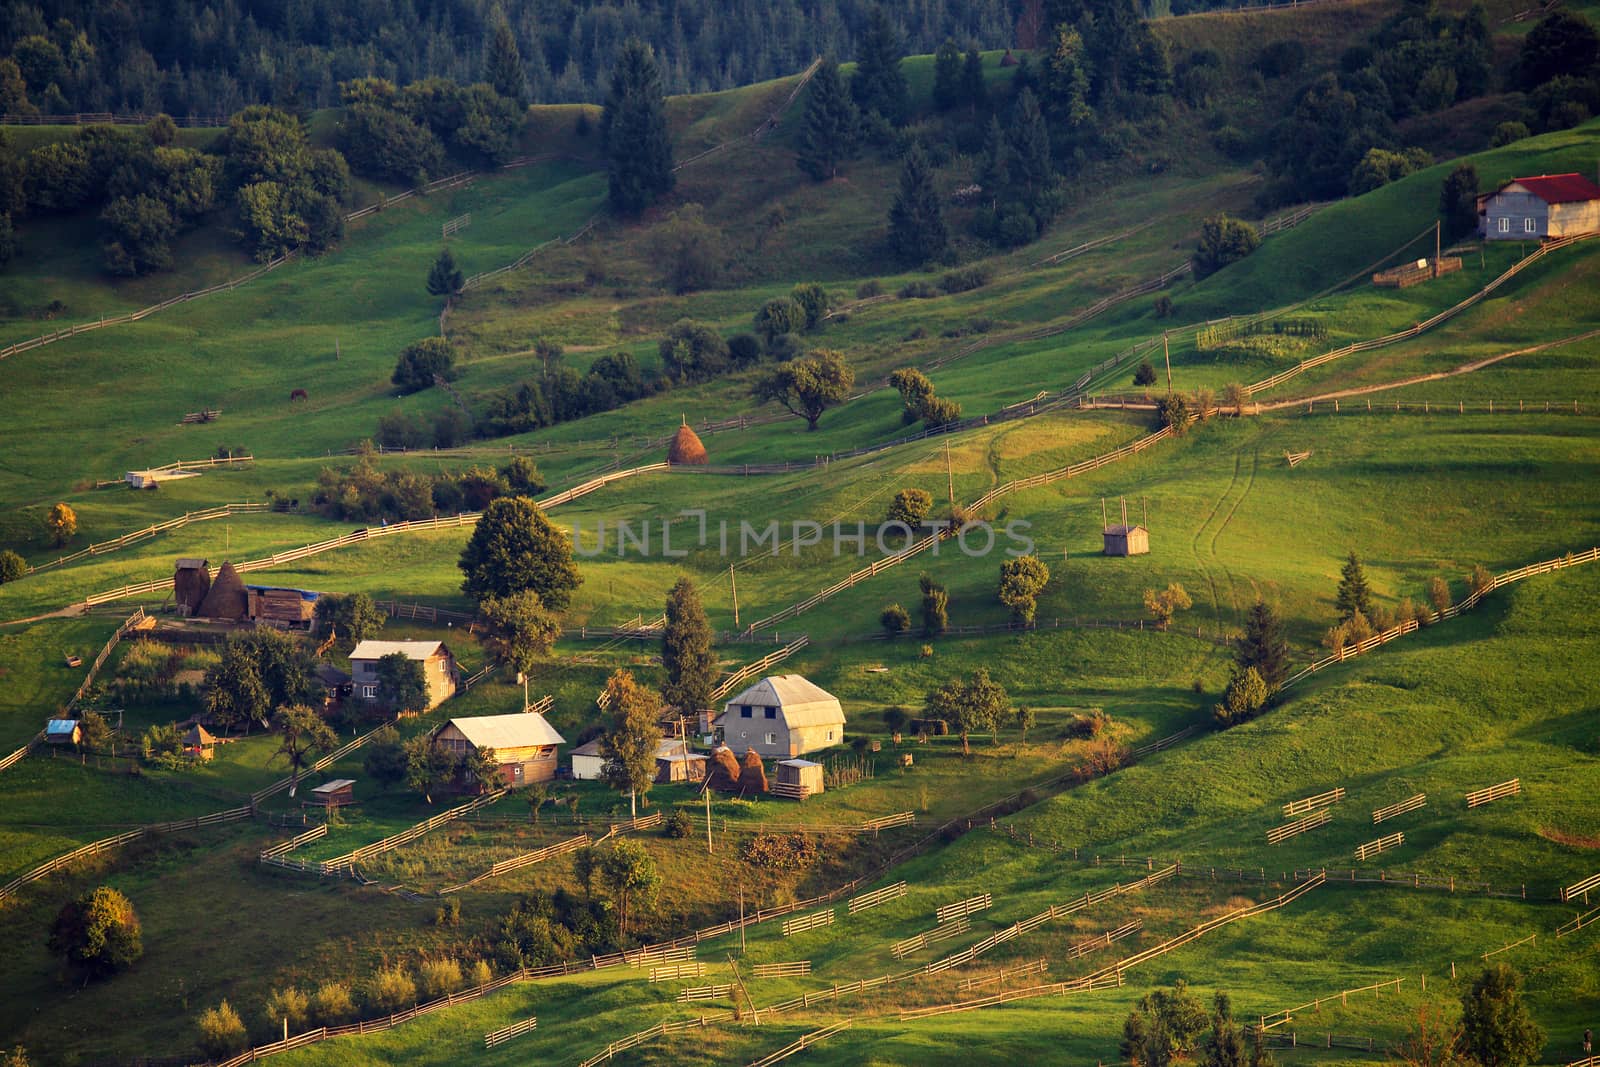 September rural scene in mountains. Authentic village and fence by weise_maxim